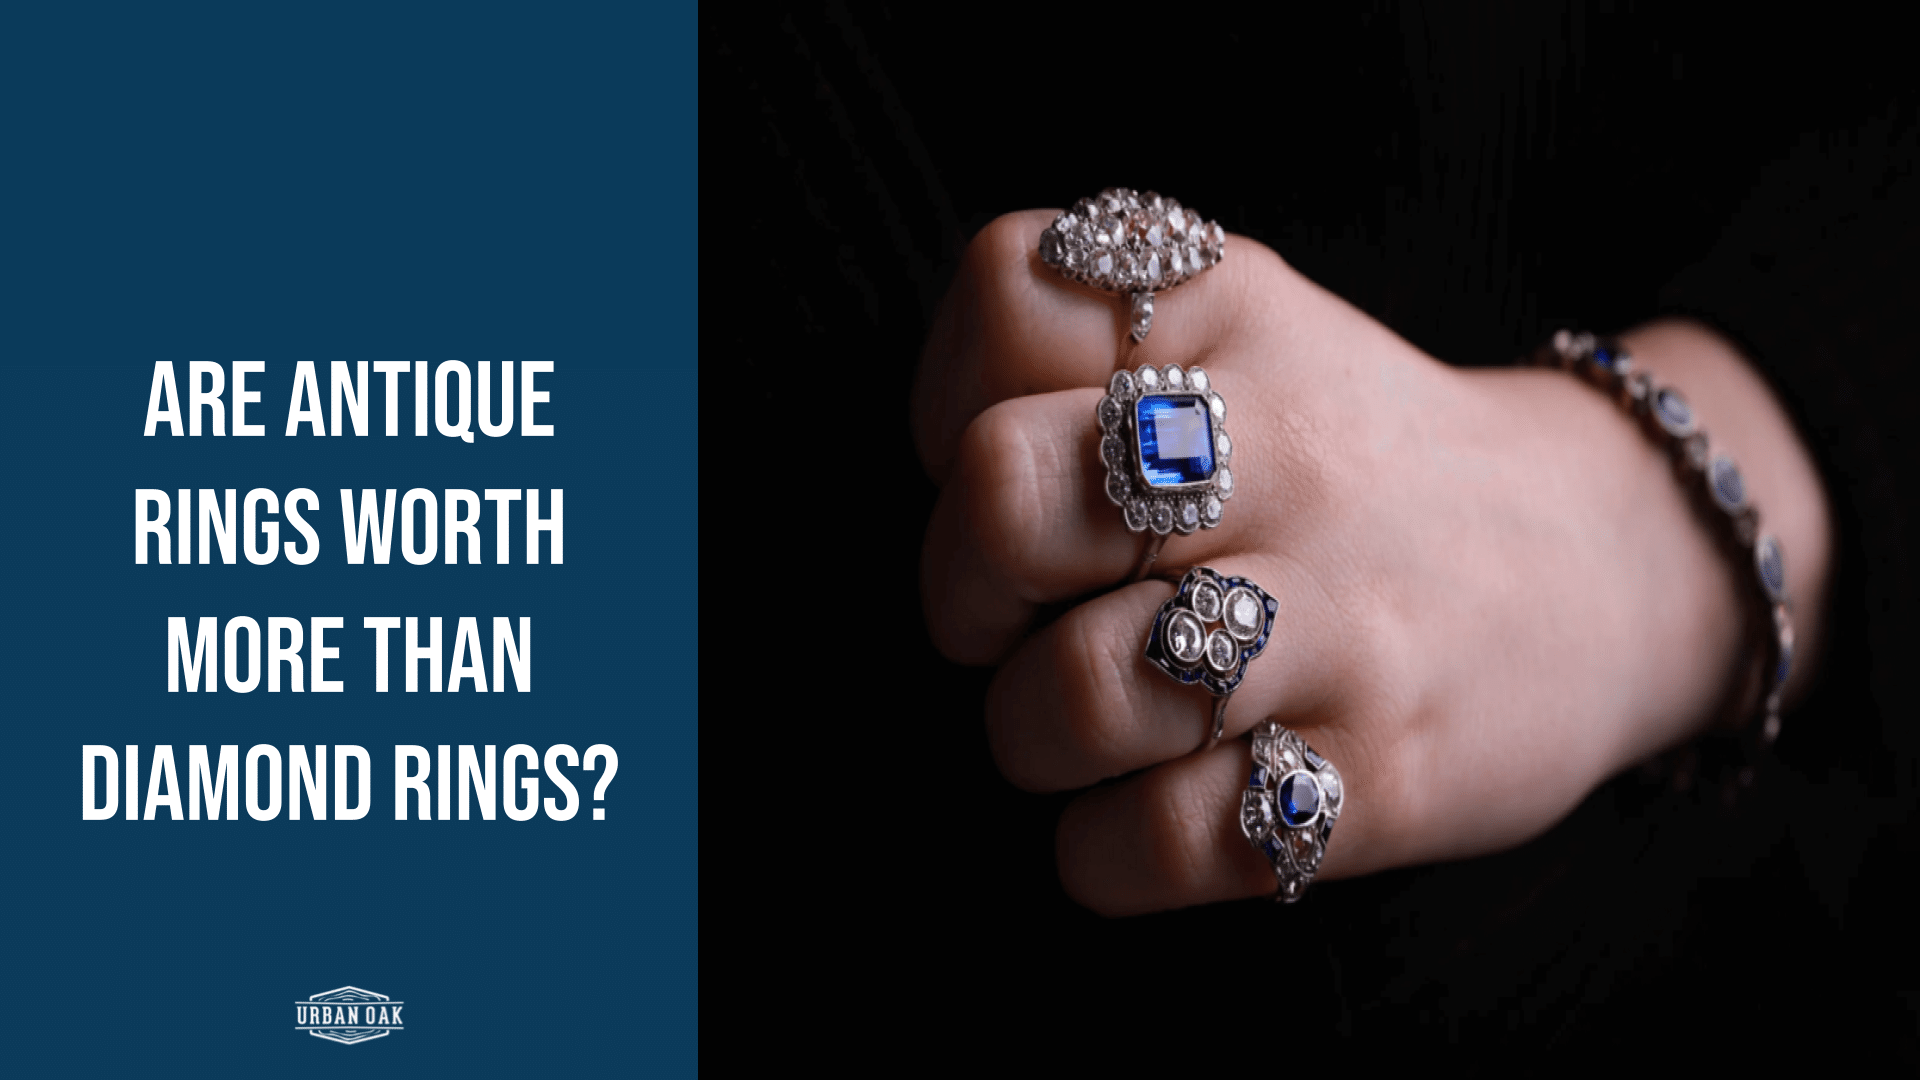 Are Antique Rings Worth More Than Diamond Rings?